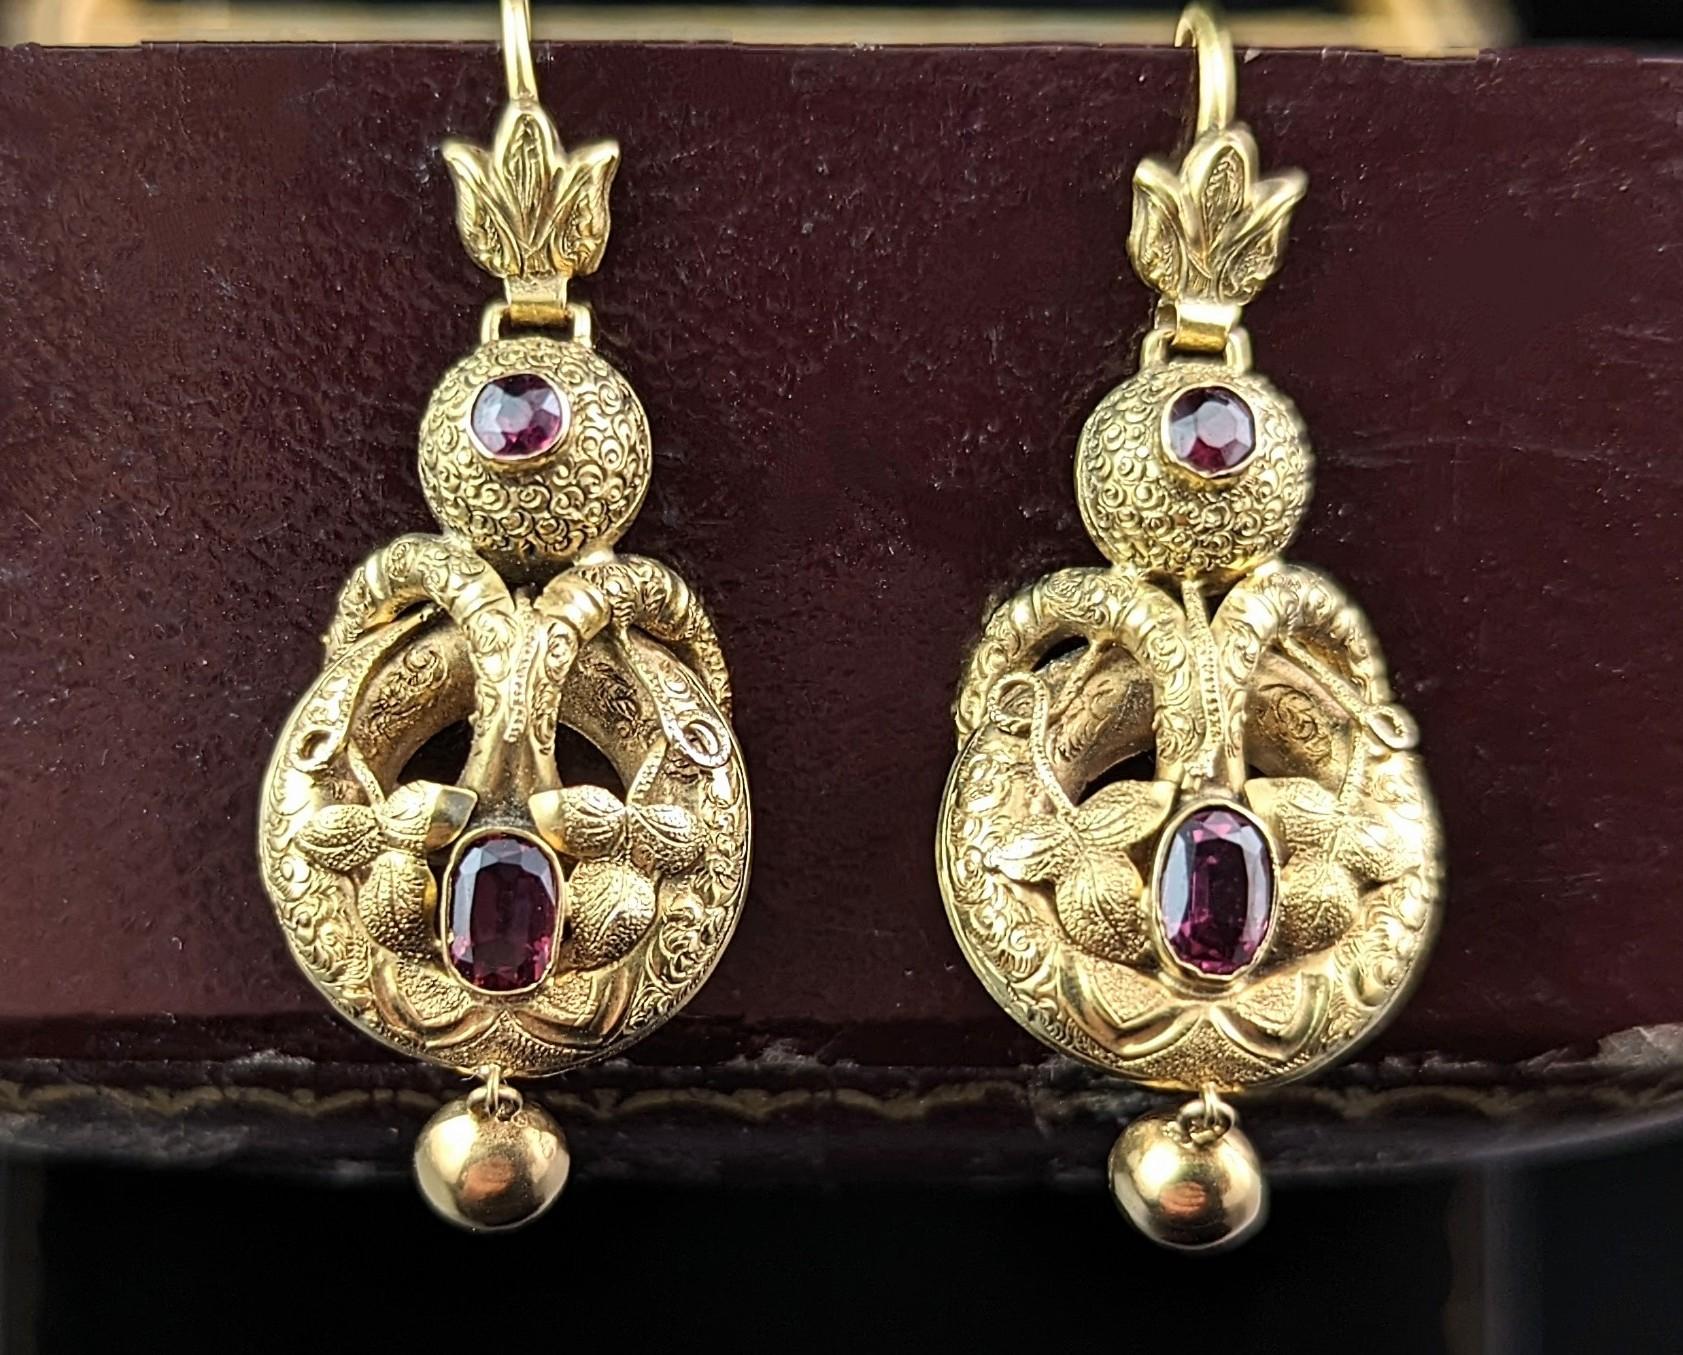 These antique Victorian garnet drop earrings are simply divine!

Such fine craftsmanship and attention to detail, they are crafted in rich 18ct yellow gold, door knocker style drops hinged from the top with a fantastic flaming grenade style.

The